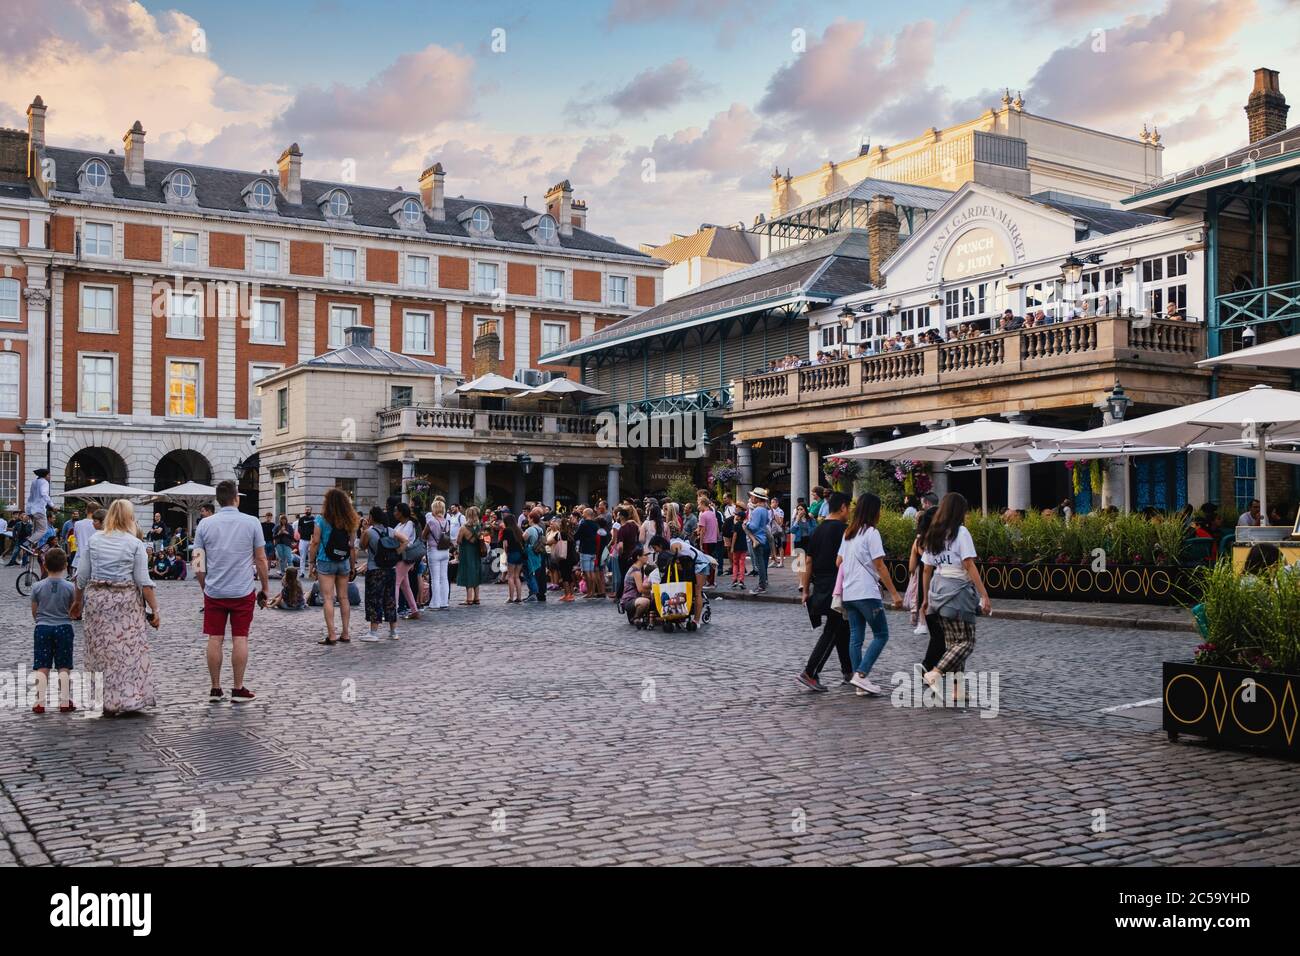 The famous Covet Garden Market in London at sunset Stock Photo